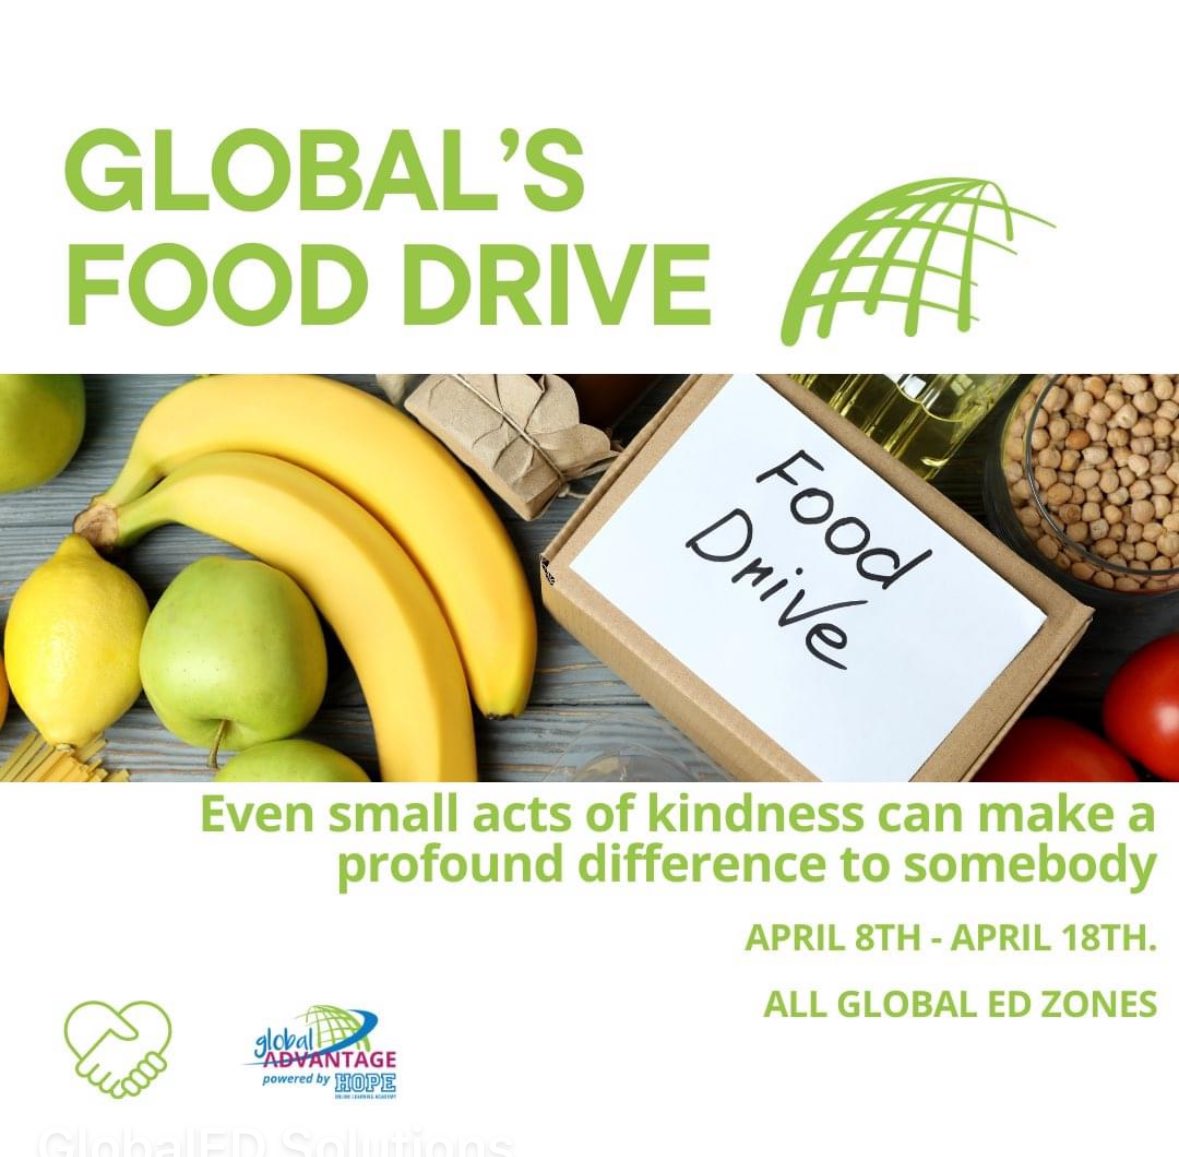 Hey Global Students! We have some exciting news to share with you all. We are hosting a food drive from April 8th to April 18th and we need your help! This is a great opportunity for us to come together as a community and make a positive impact on those in need. @Global_OnlineED